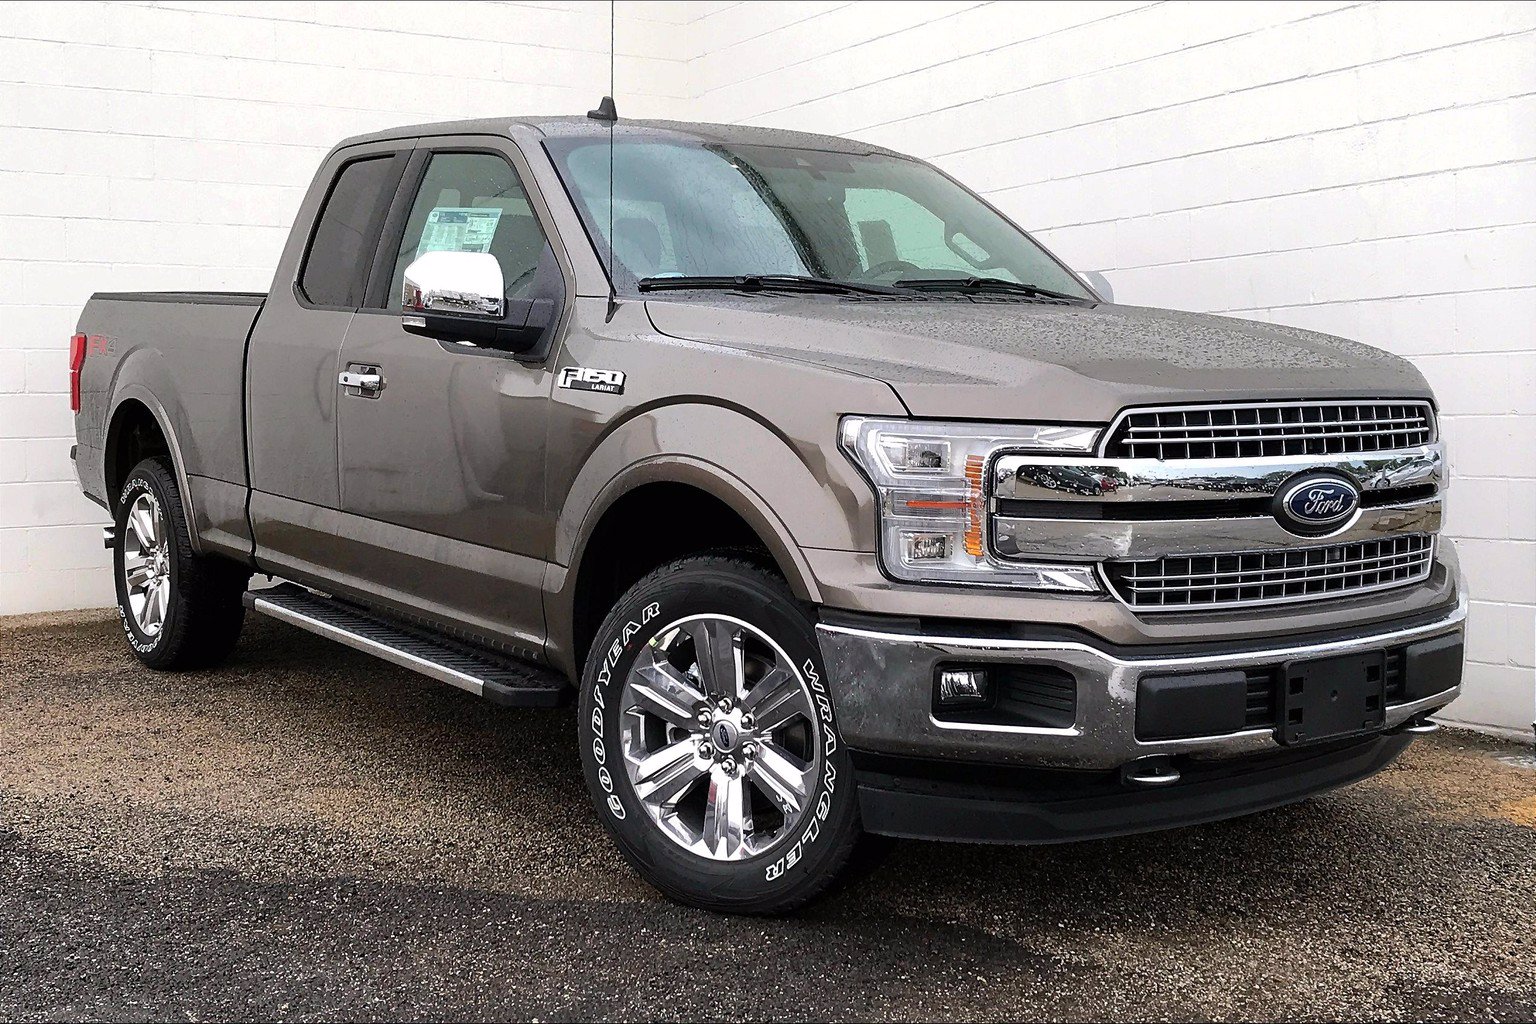 New 2020 Ford F-150 Lariat Super Cab in Morton #E57165 | Mike Murphy Ford